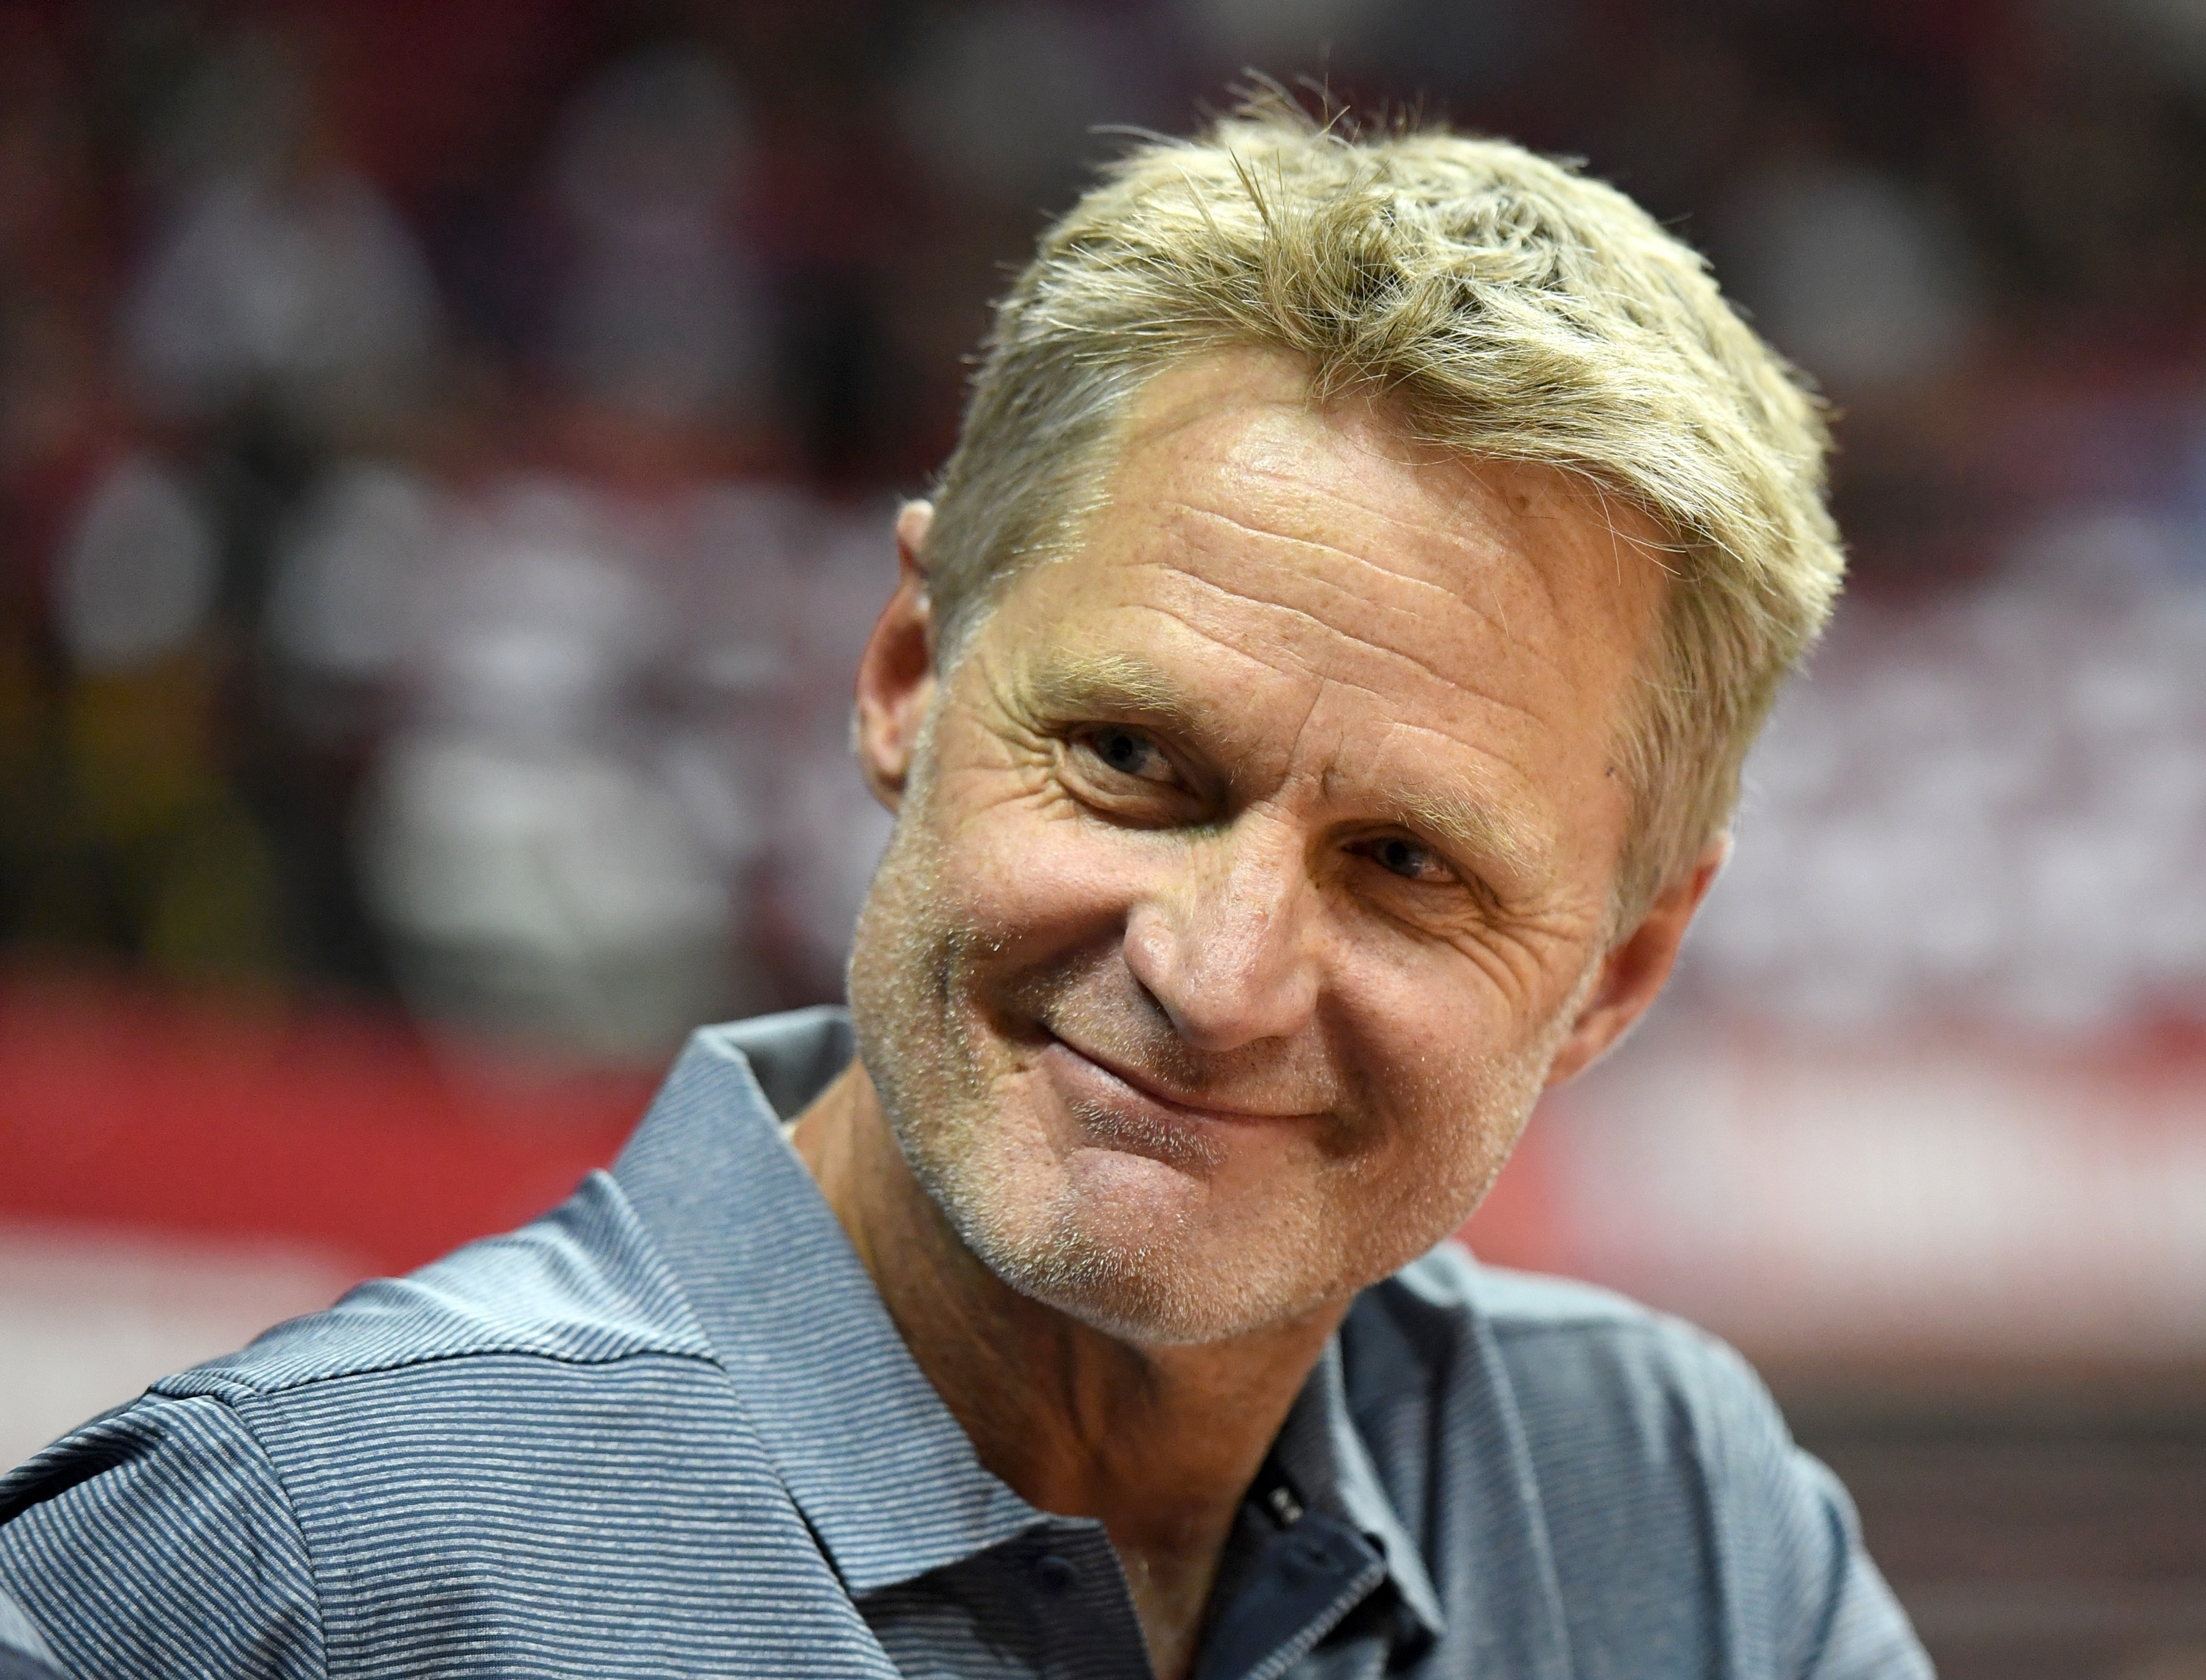 Steve Kerr Says ‘Screw the Asterisk’: The NBA Champion in Orlando Will Be ‘Legit and Deserved’